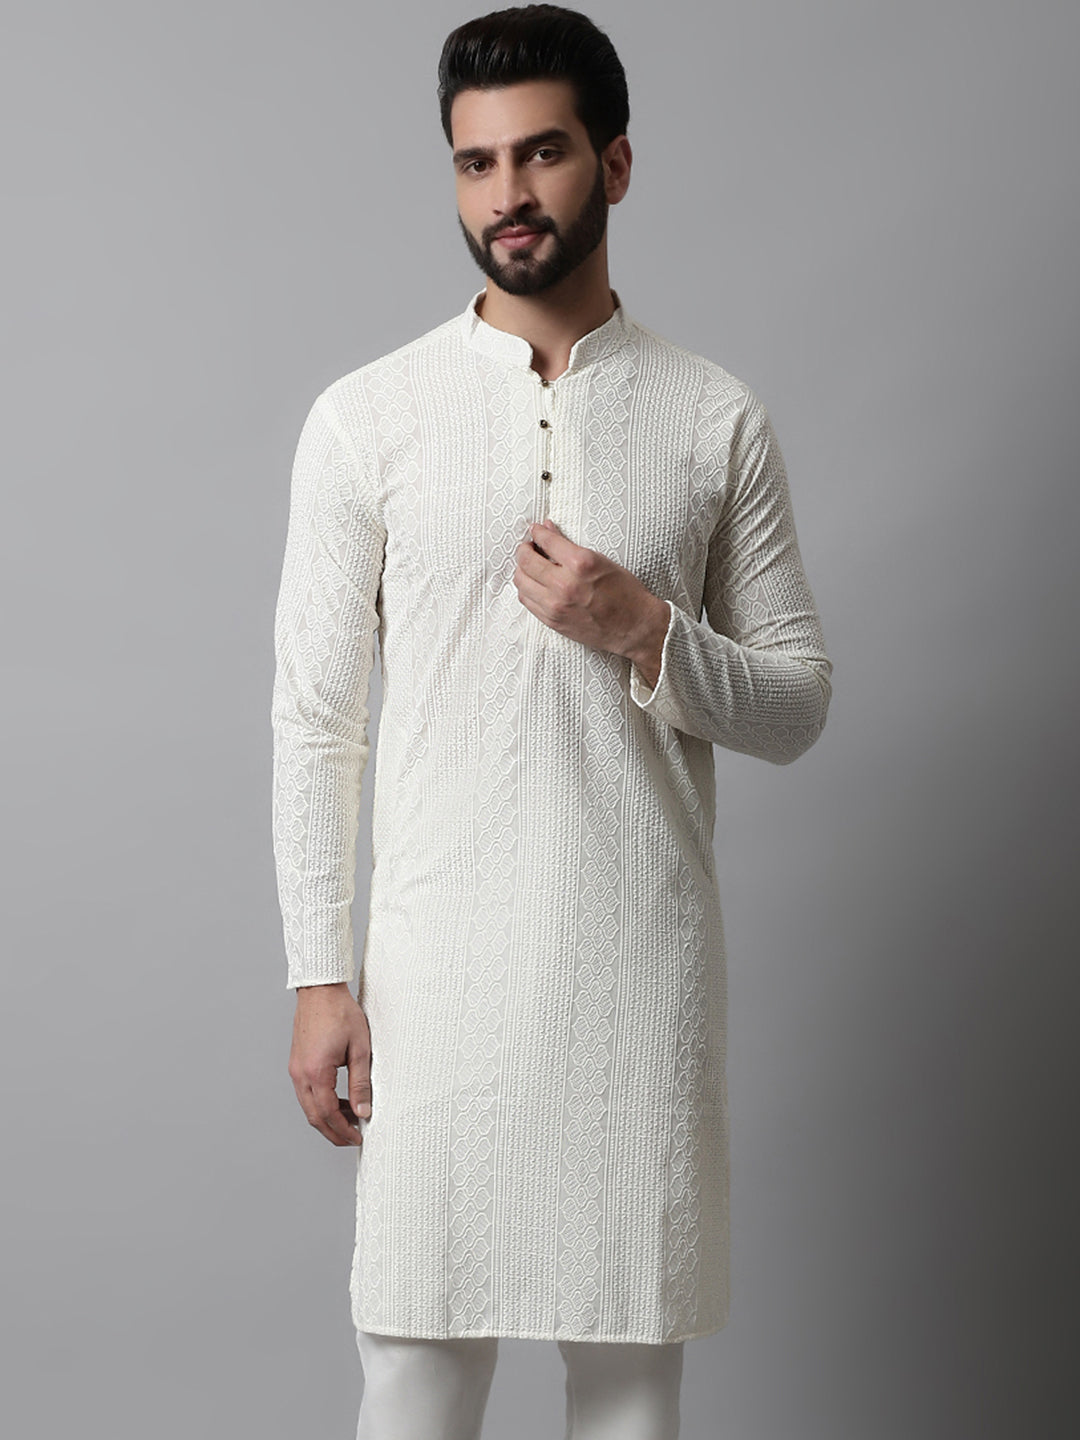 Jompers Men Cream Embroidered Kurta Only